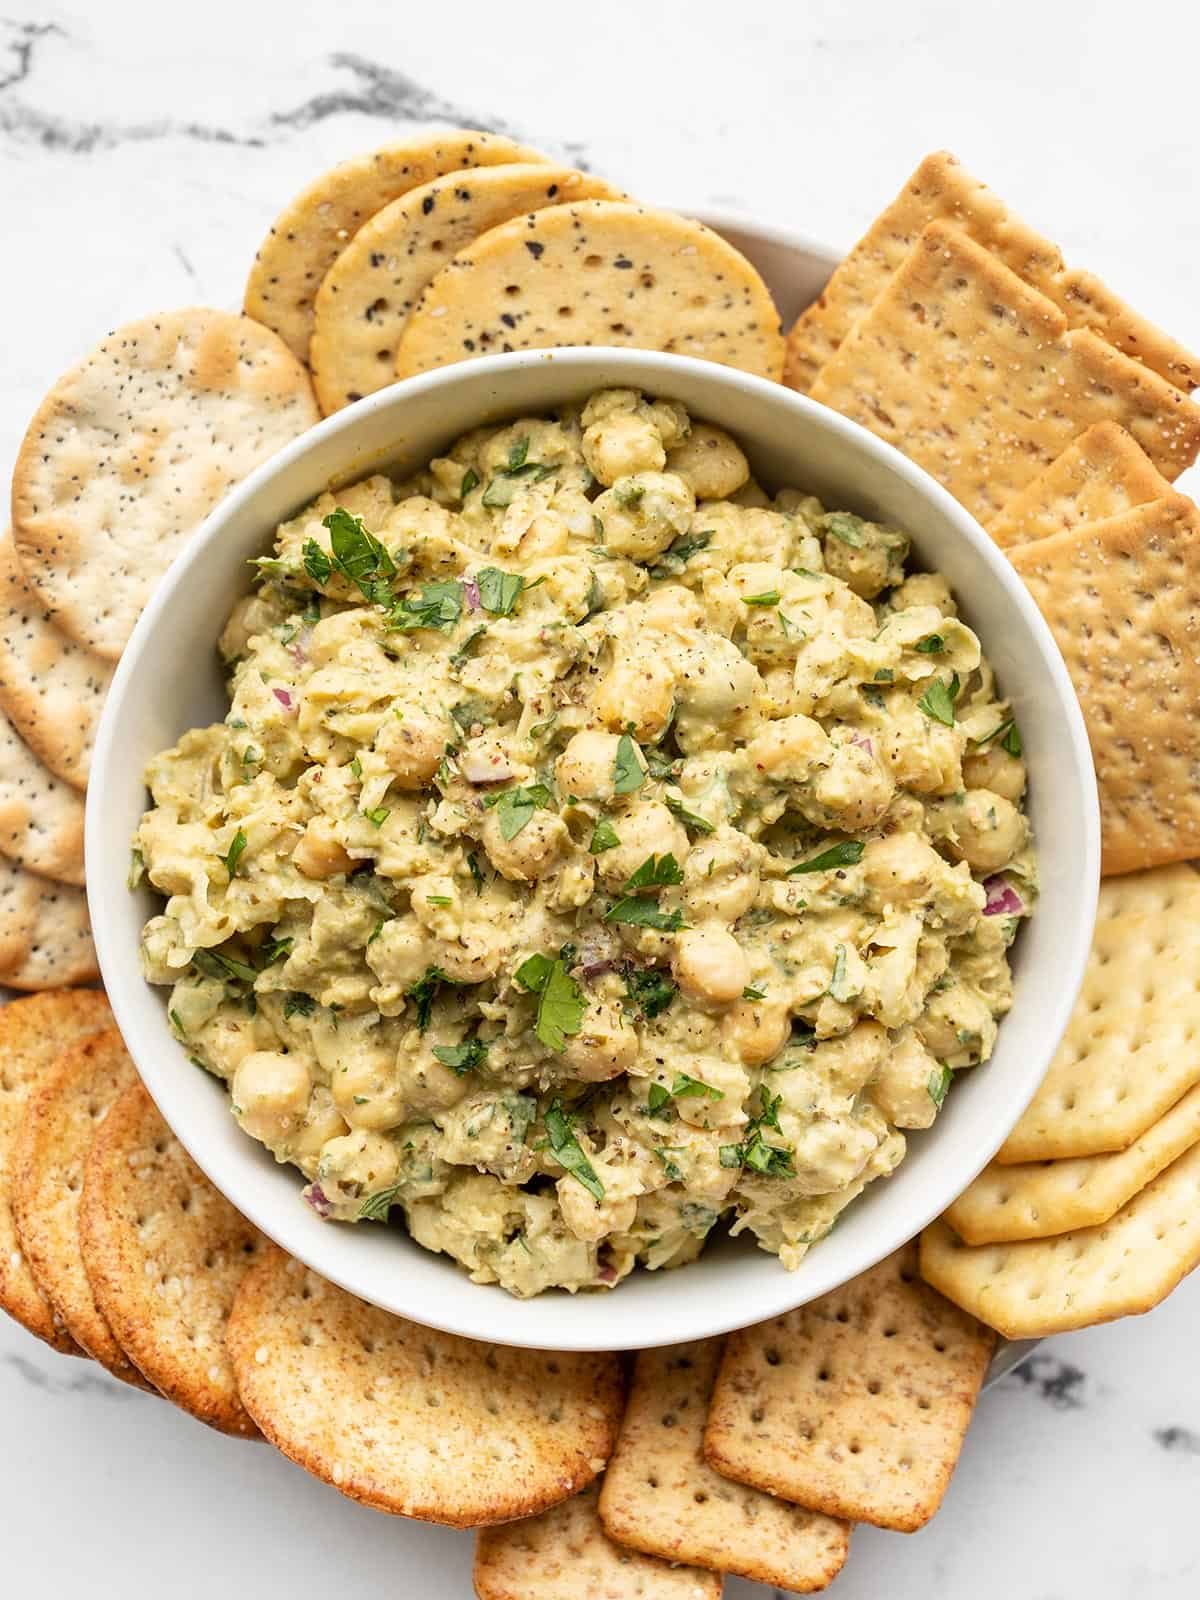 Pesto Chickpea Salad in a bowl surrounded by crackers